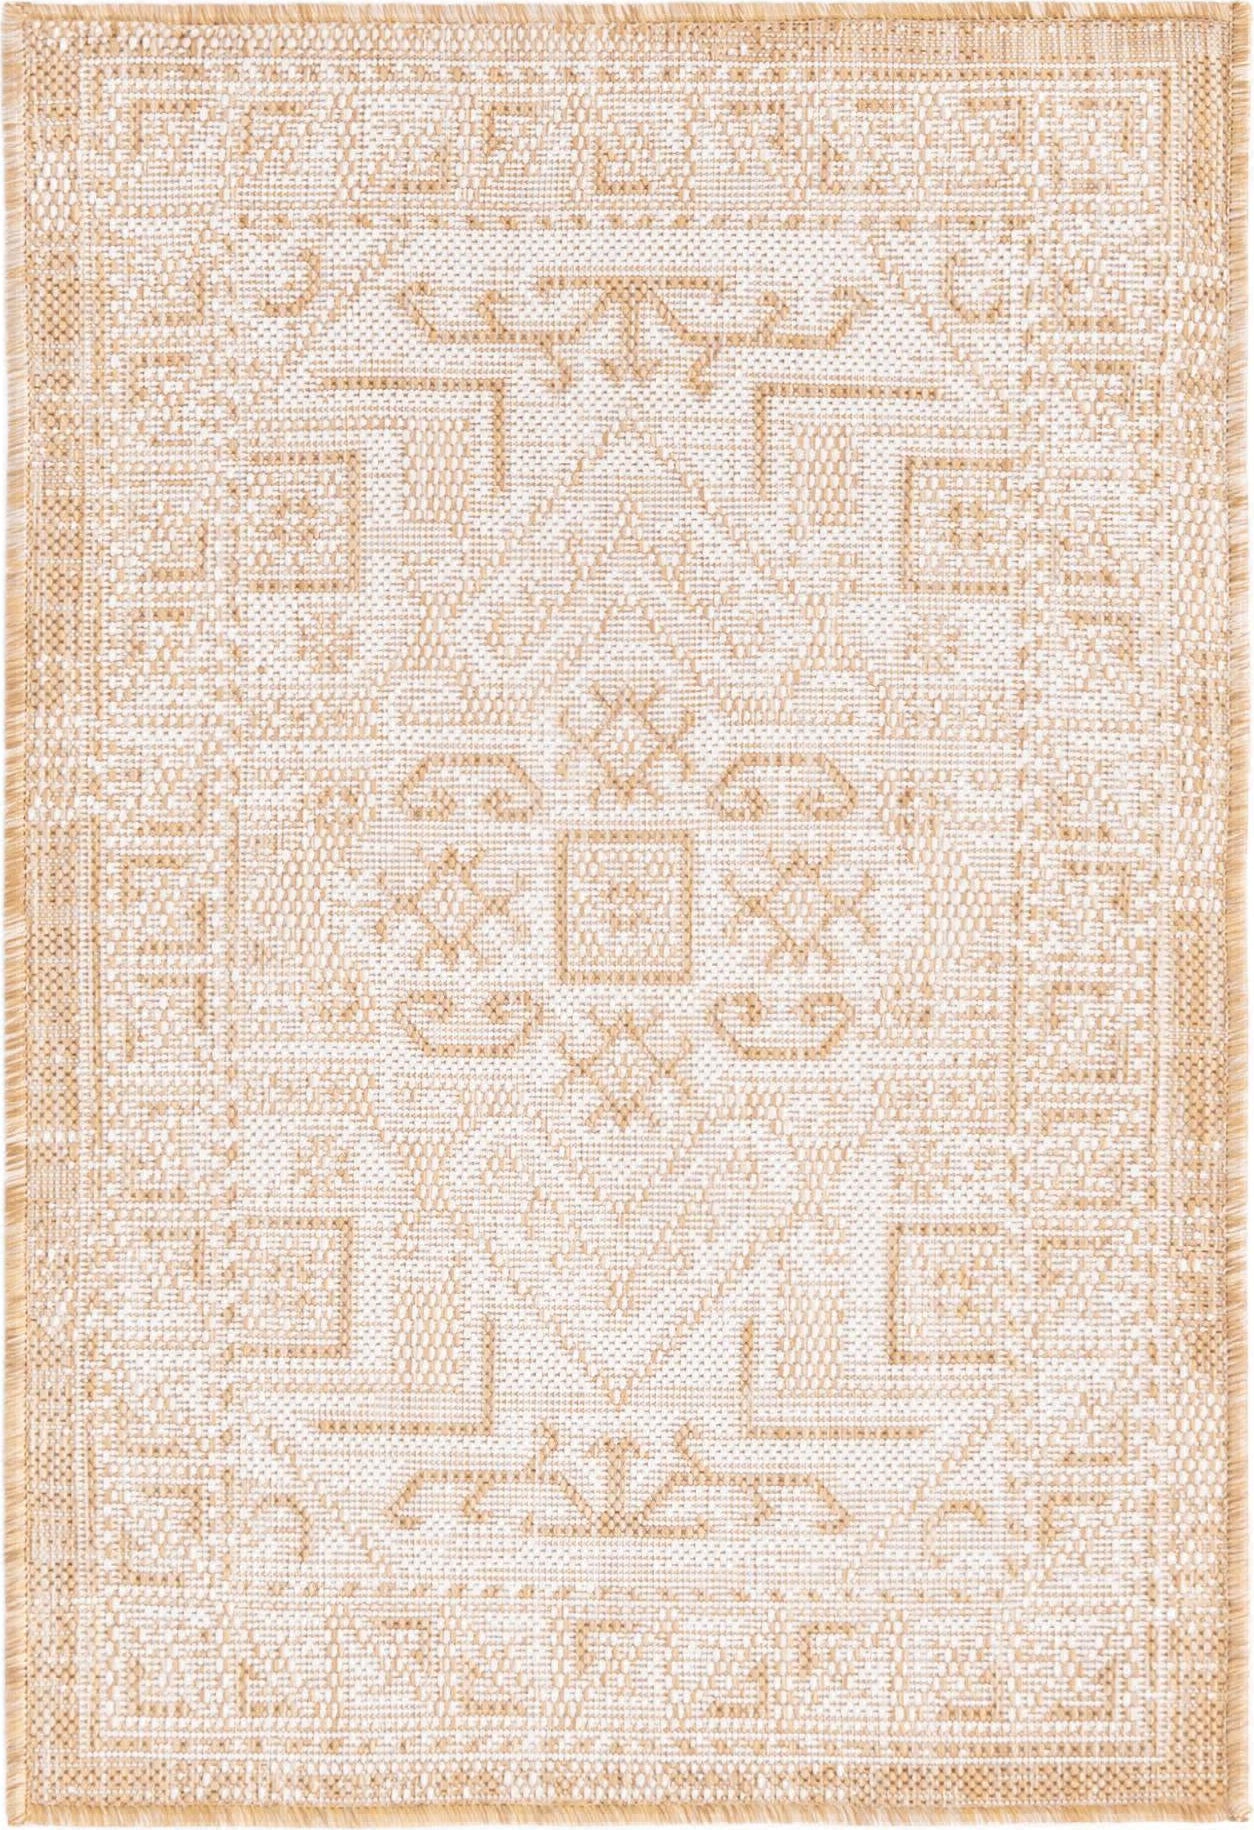 Unique Loom Outdoor Aztec T-KZOD16 Natural Area Rug main image